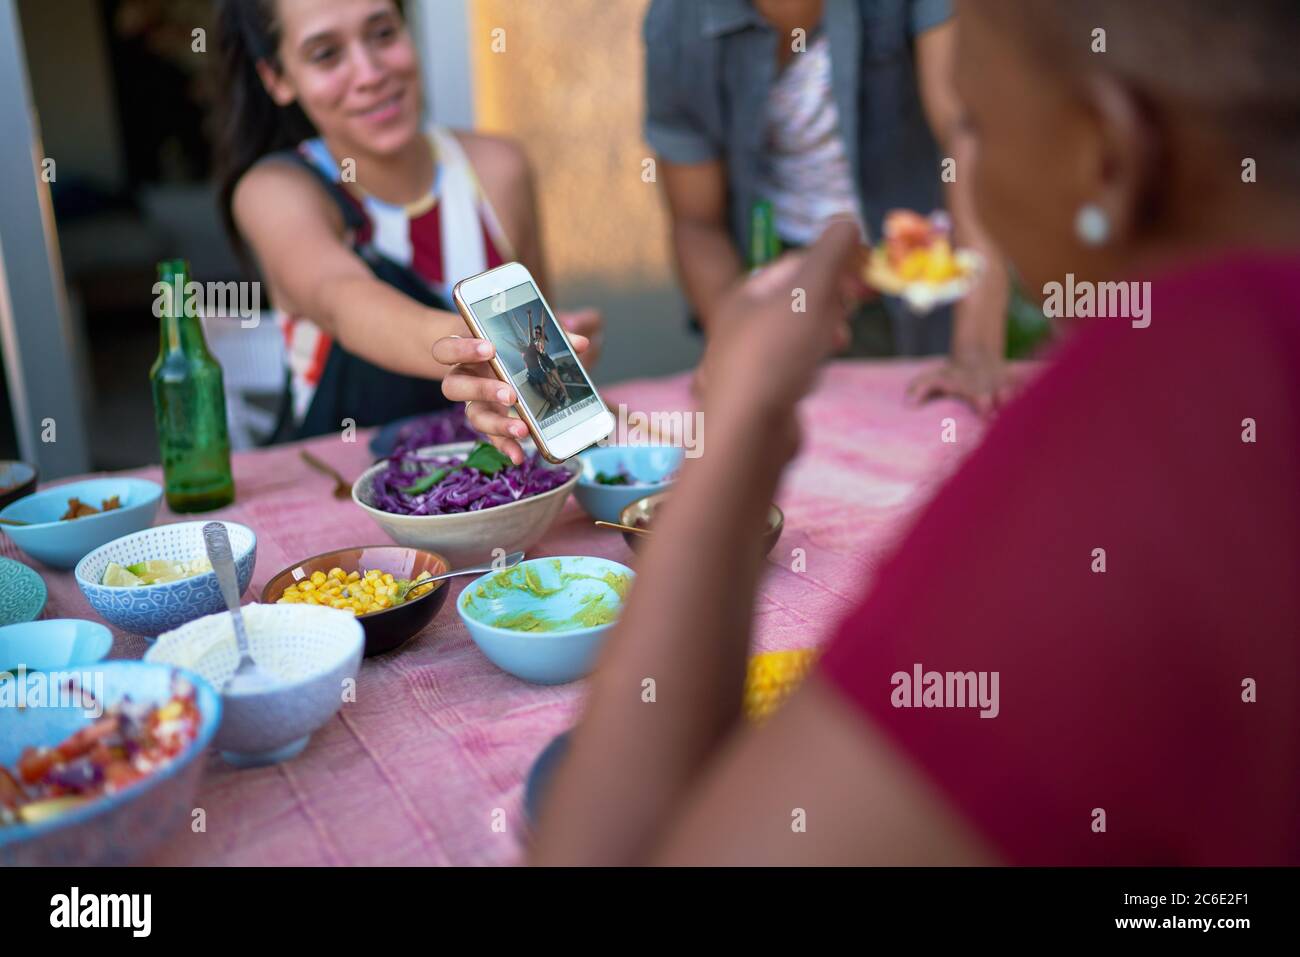 Young woman showing smart phone to friend at patio table Stock Photo